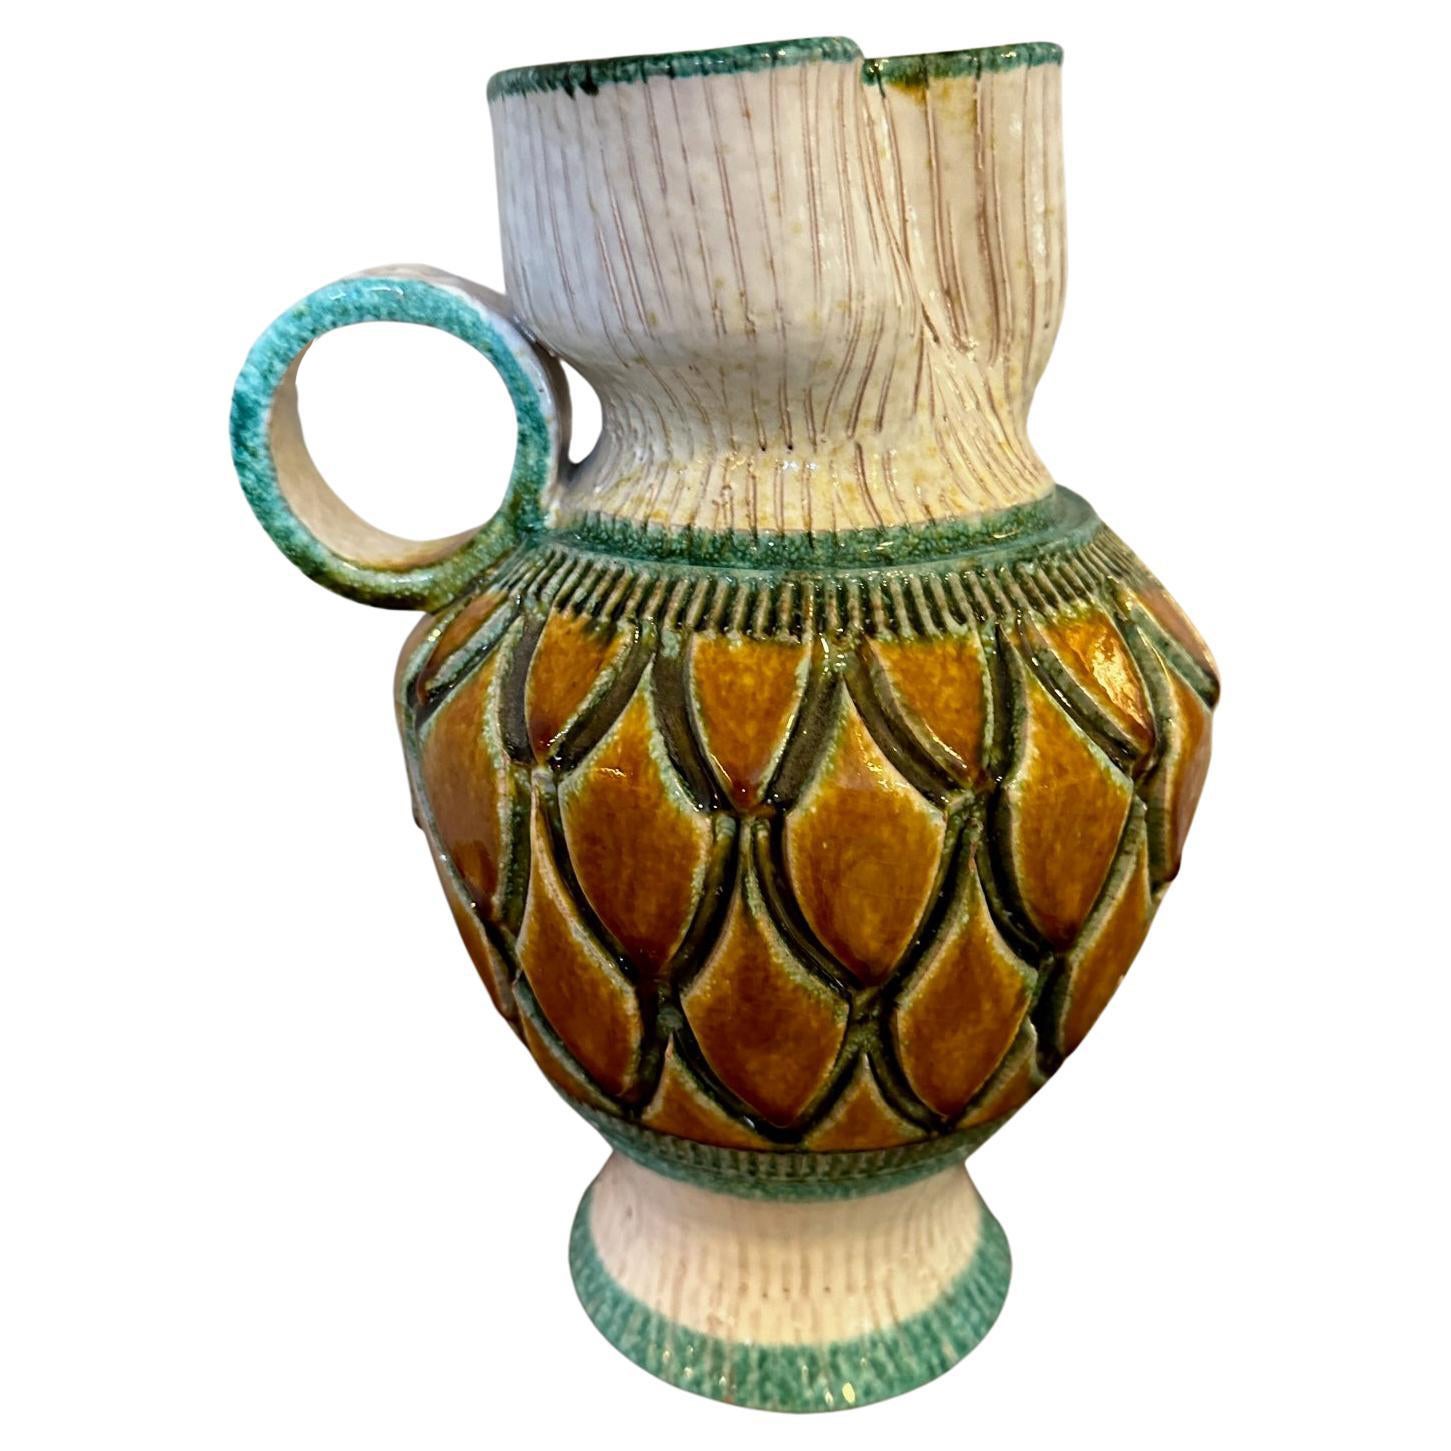 20th century French Vallauris Ceramic Pitcher, 1950s